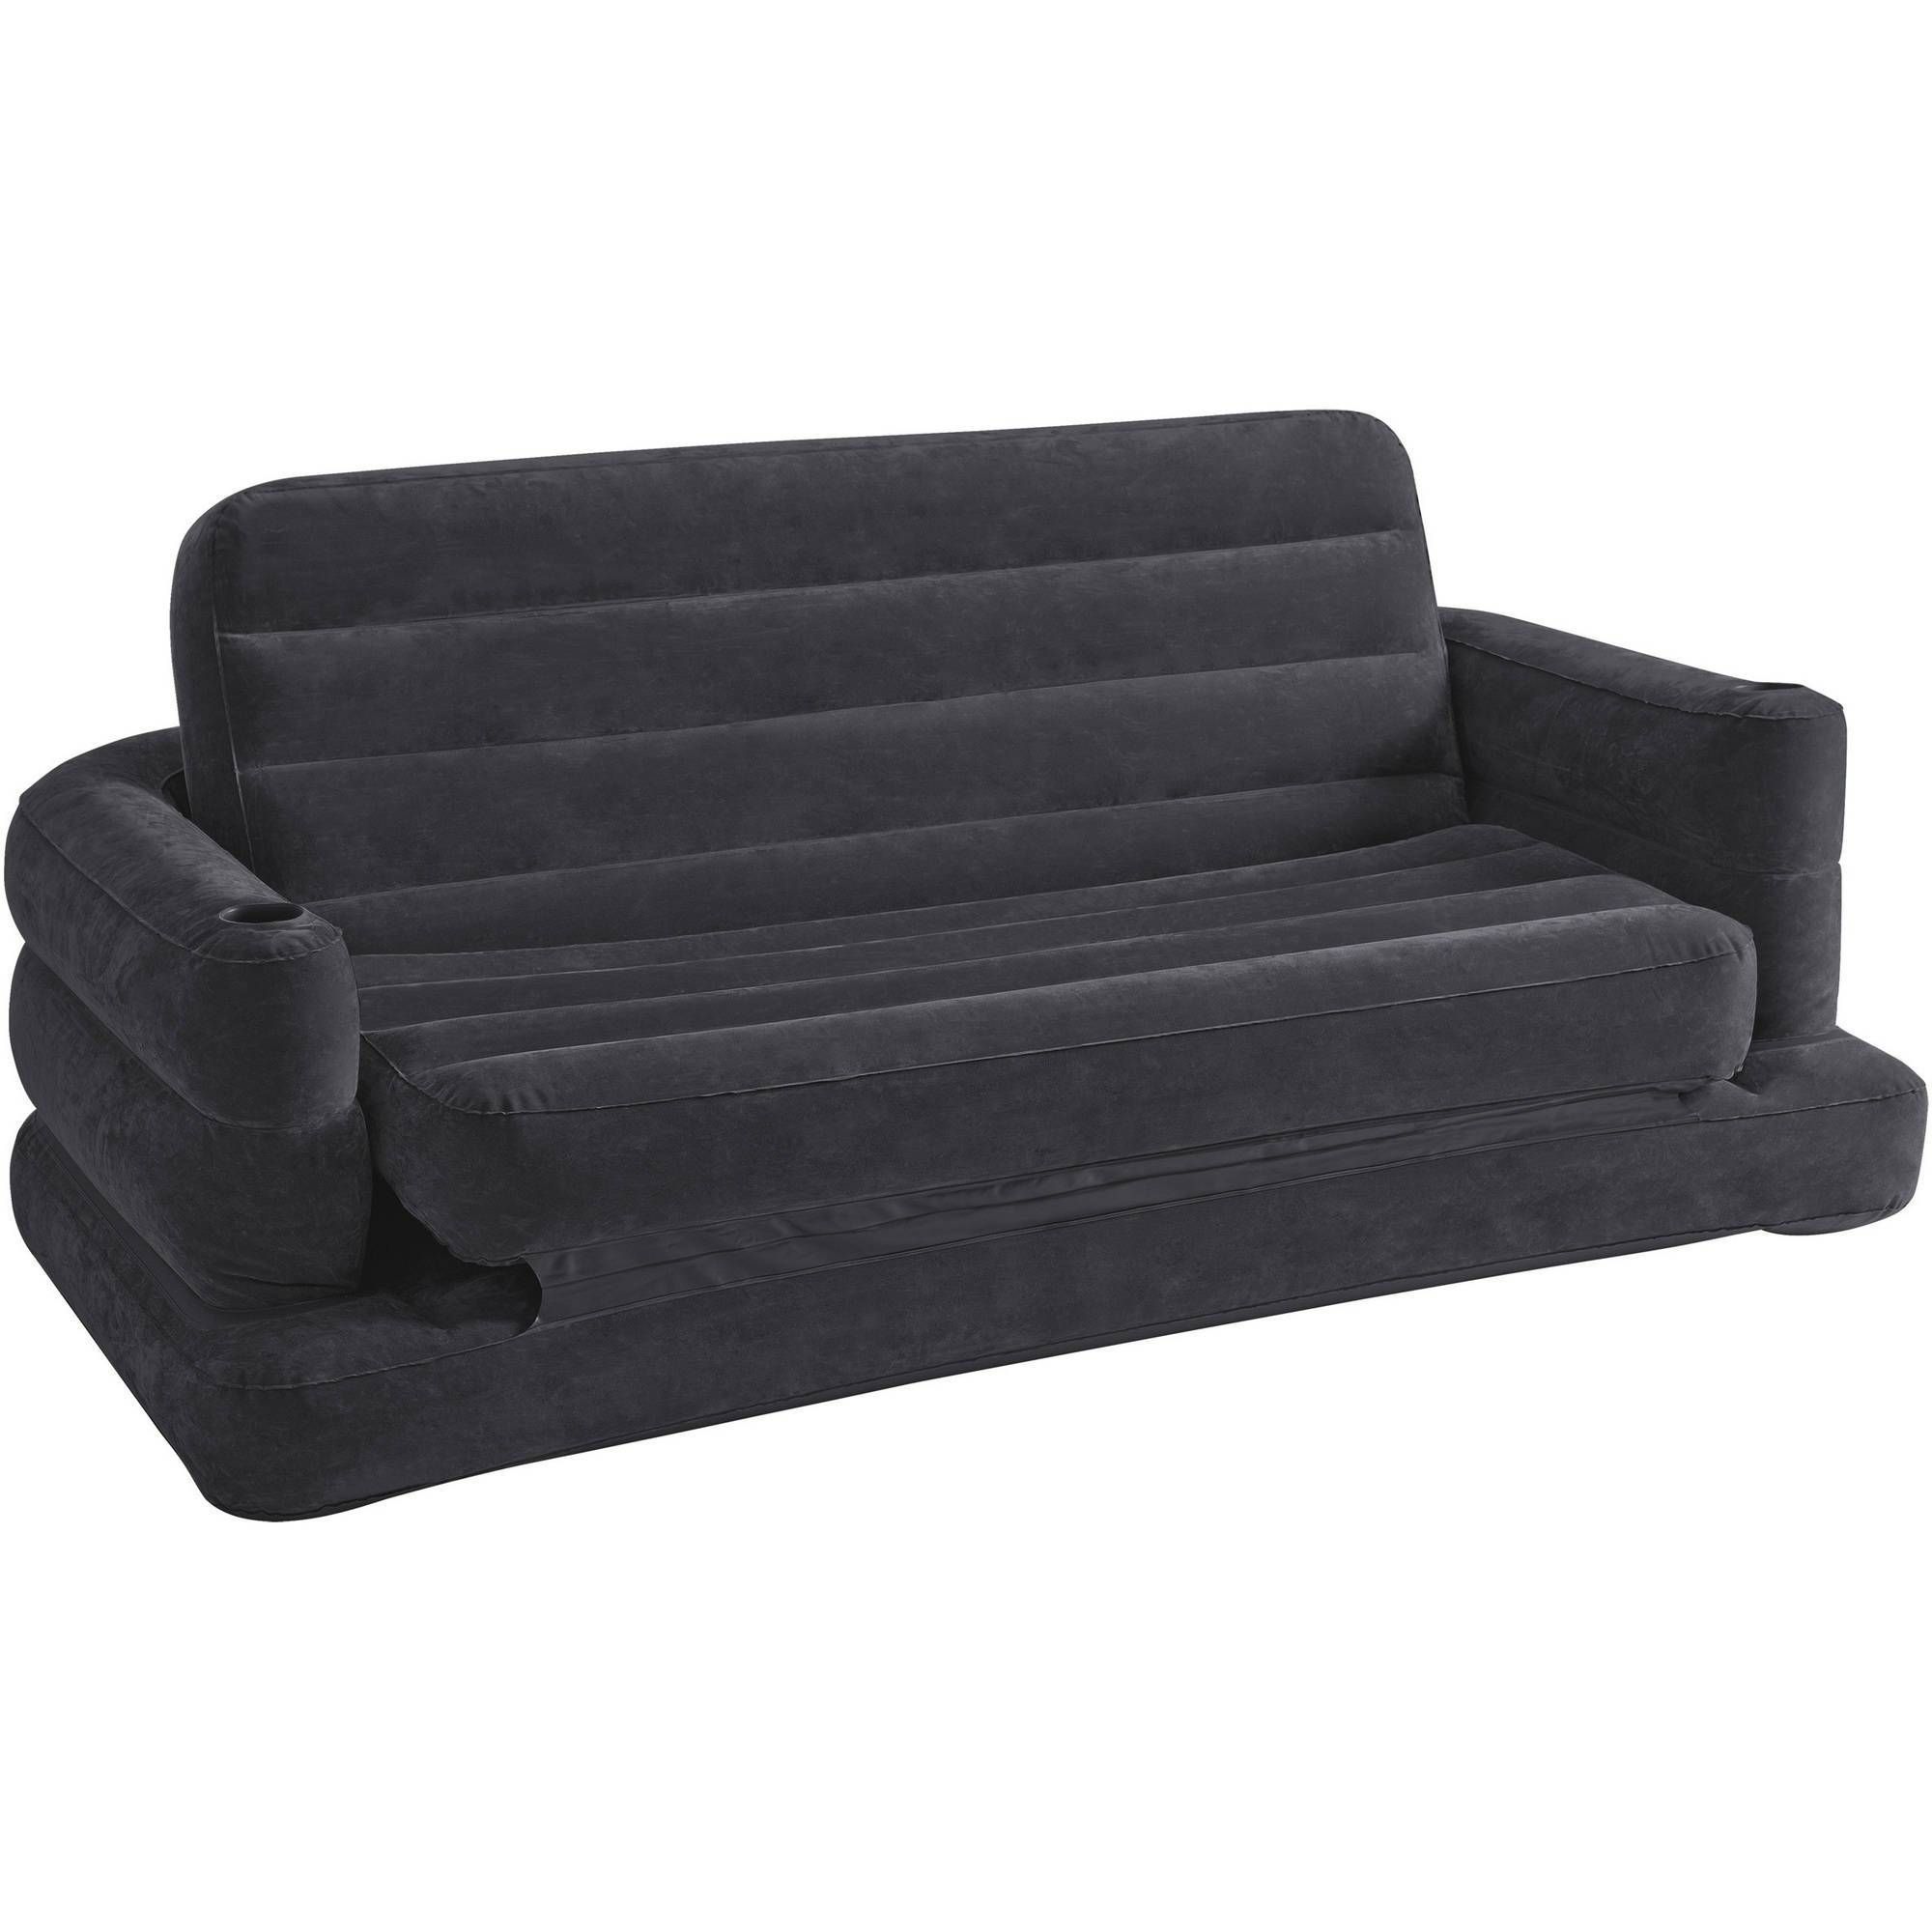 Intex Inflatable Pull Out Sofa 15 With Intex Inflatable Pull Out In Intex Inflatable Pull Out Sofas (View 14 of 15)